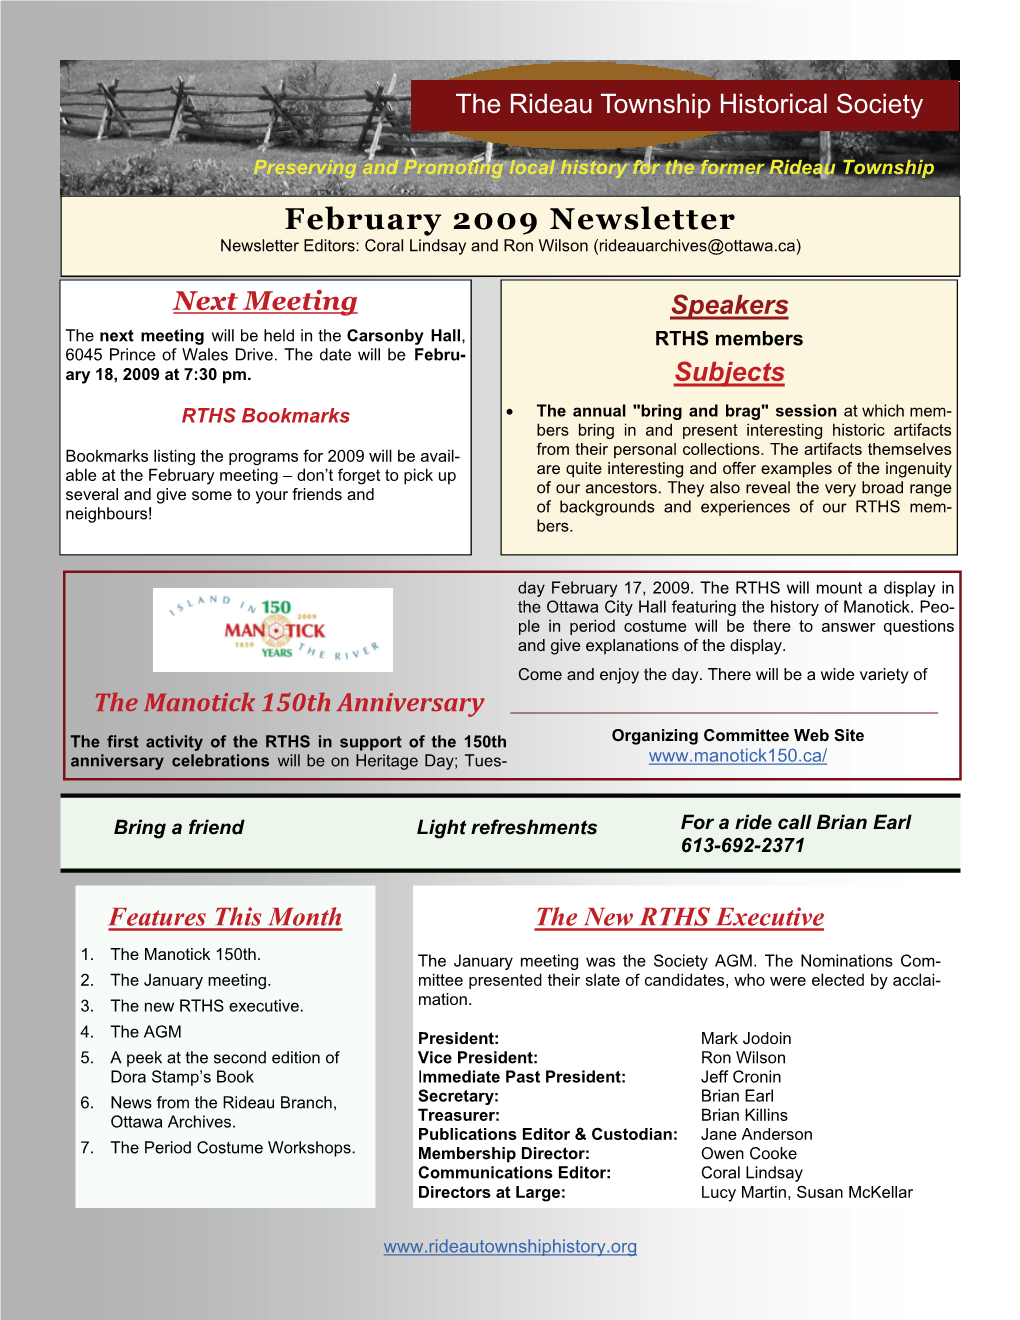 February 2009 Newsletter Newsletter Editors: Coral Lindsay and Ron Wilson (Rideauarchives@Ottawa.Ca)